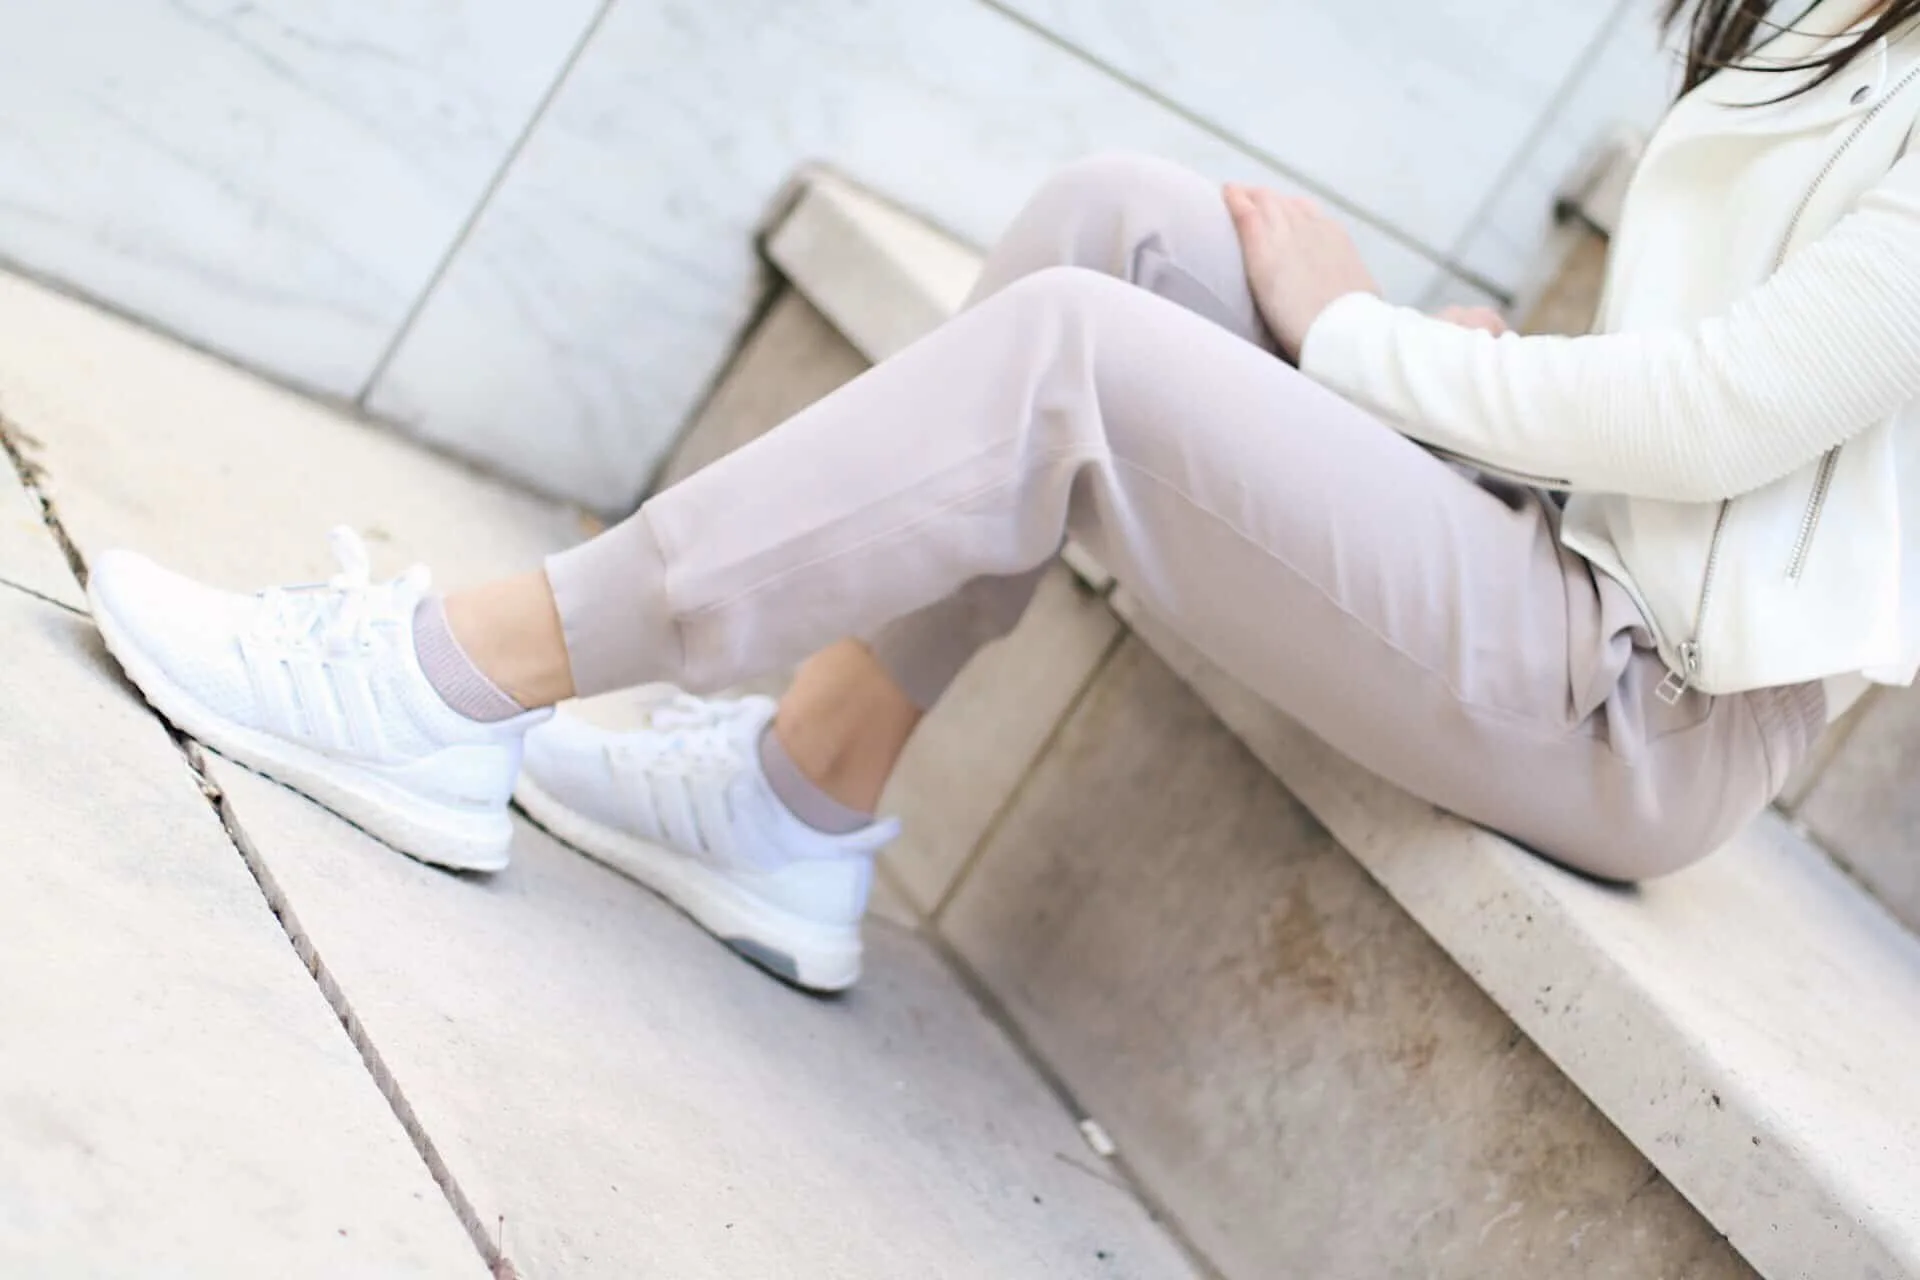 How to style white sneakers for spring weather | casual spring outfit ideas and inspiration | styling Adidas triple white Ultra Boost sneakers | Diary of a Toronto Girl, a Canadian lifestyle blog